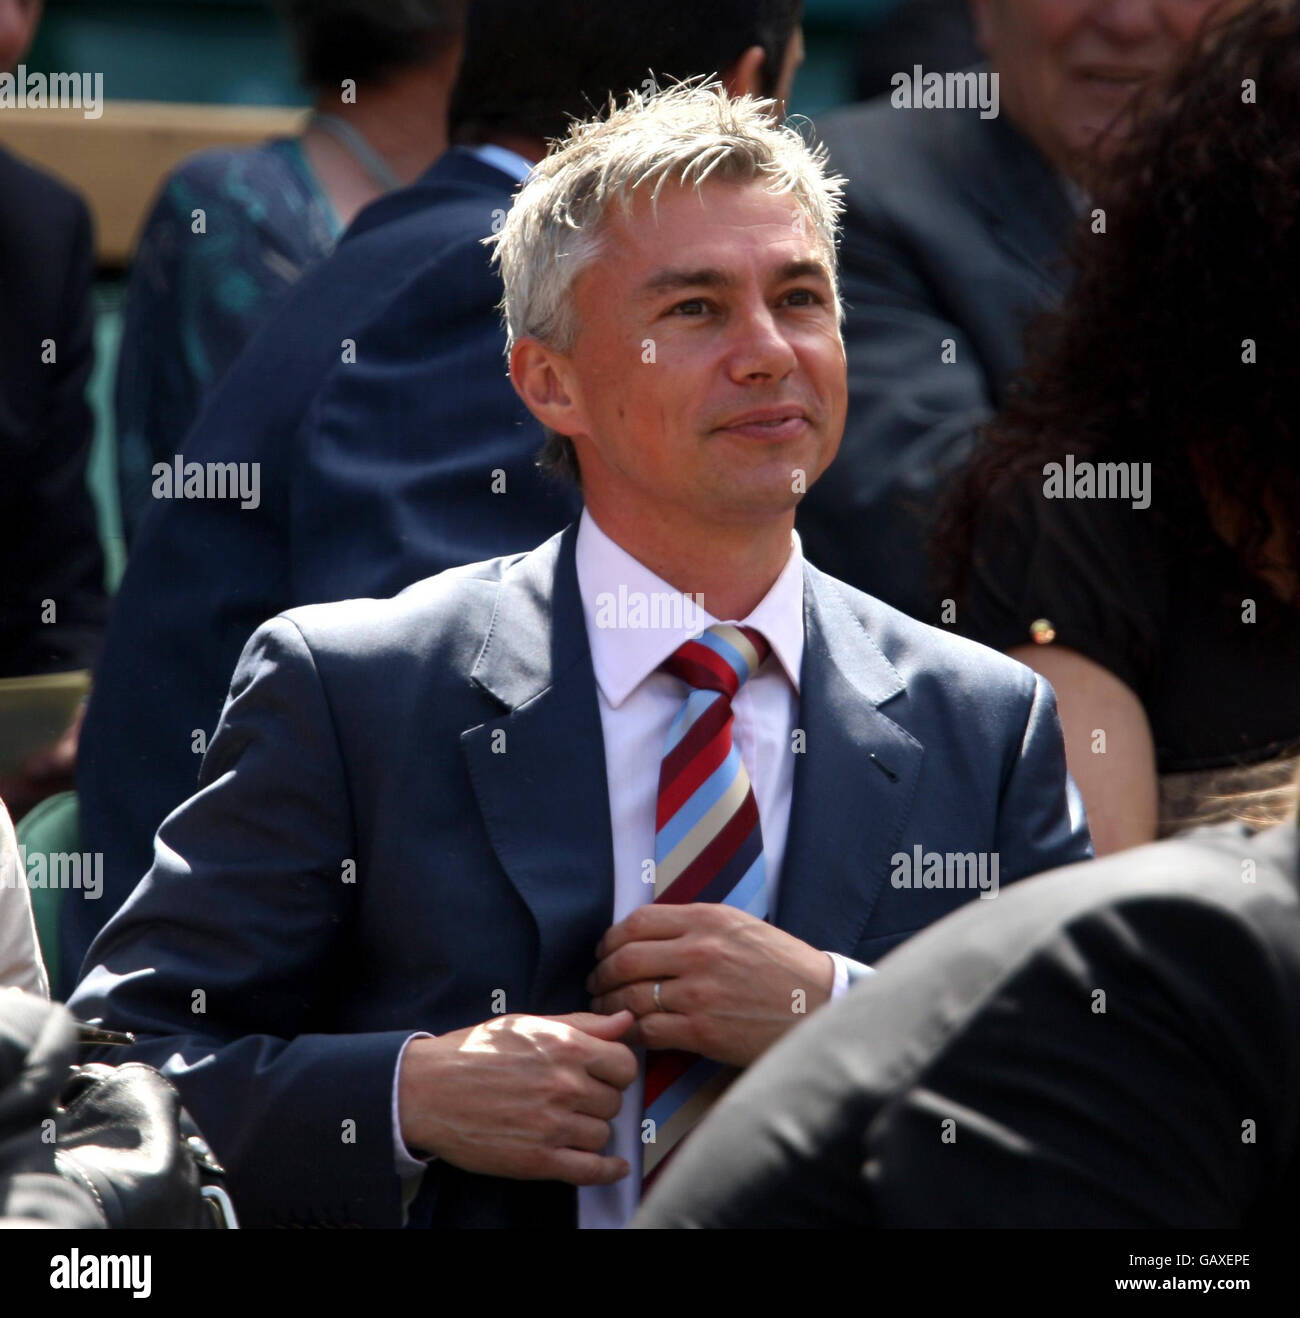 Jonathan Edwards in the royal box on centre court during the Wimbledon Championships 2008 at the All England Tennis Club in Wimbledon. Stock Photo